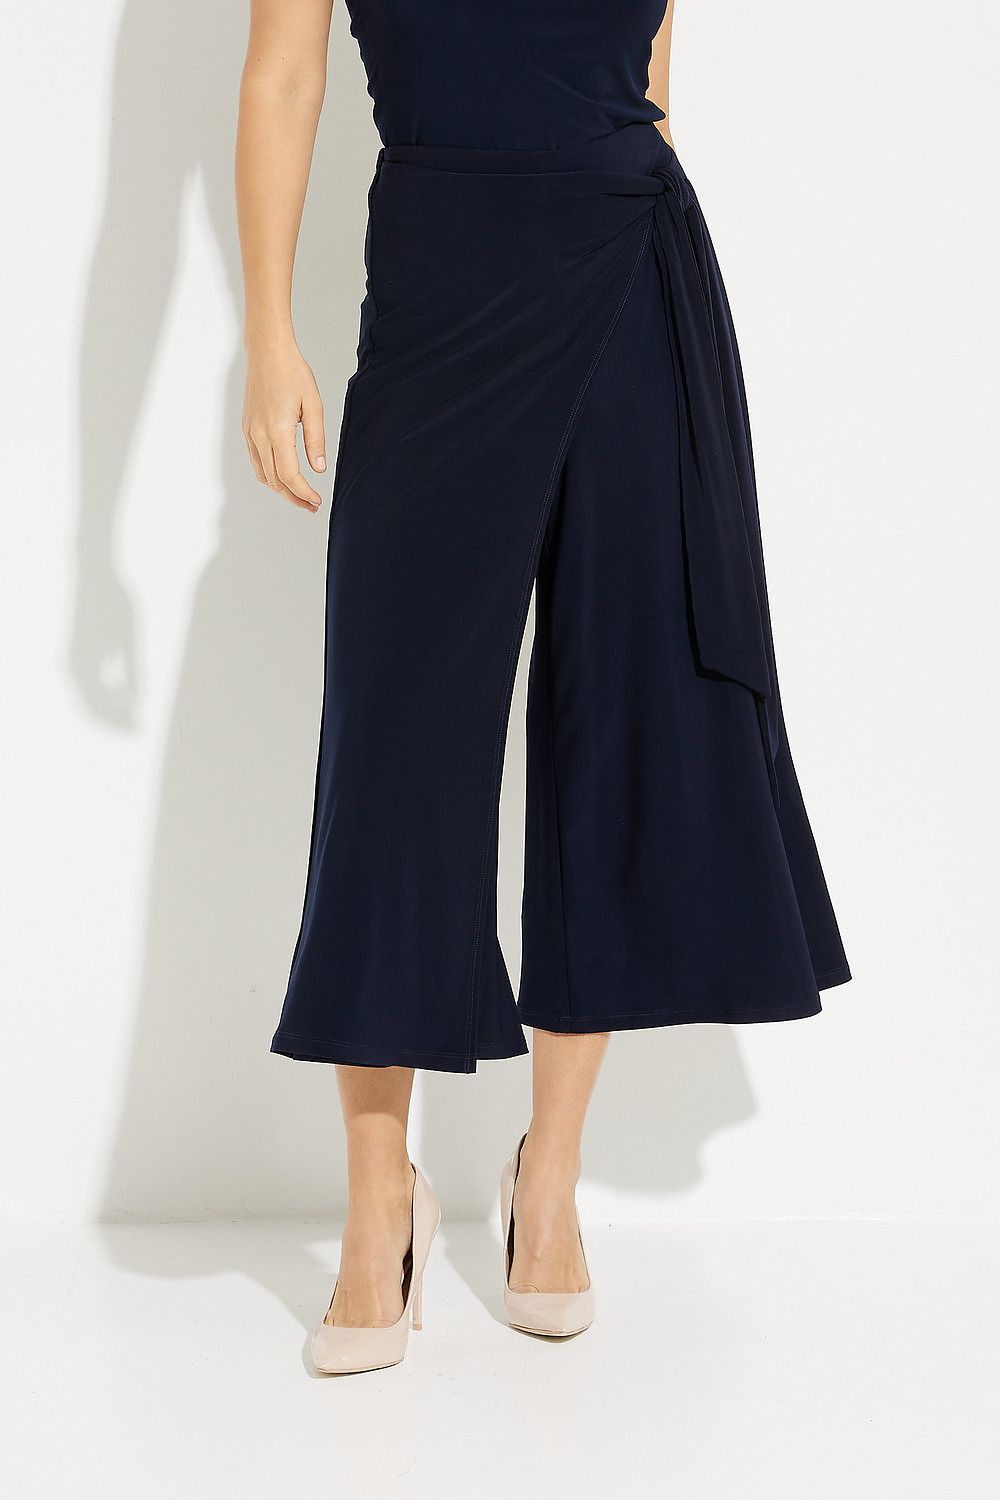 Wide Leg High-Rise Pants Style 231140. Midnight Blue